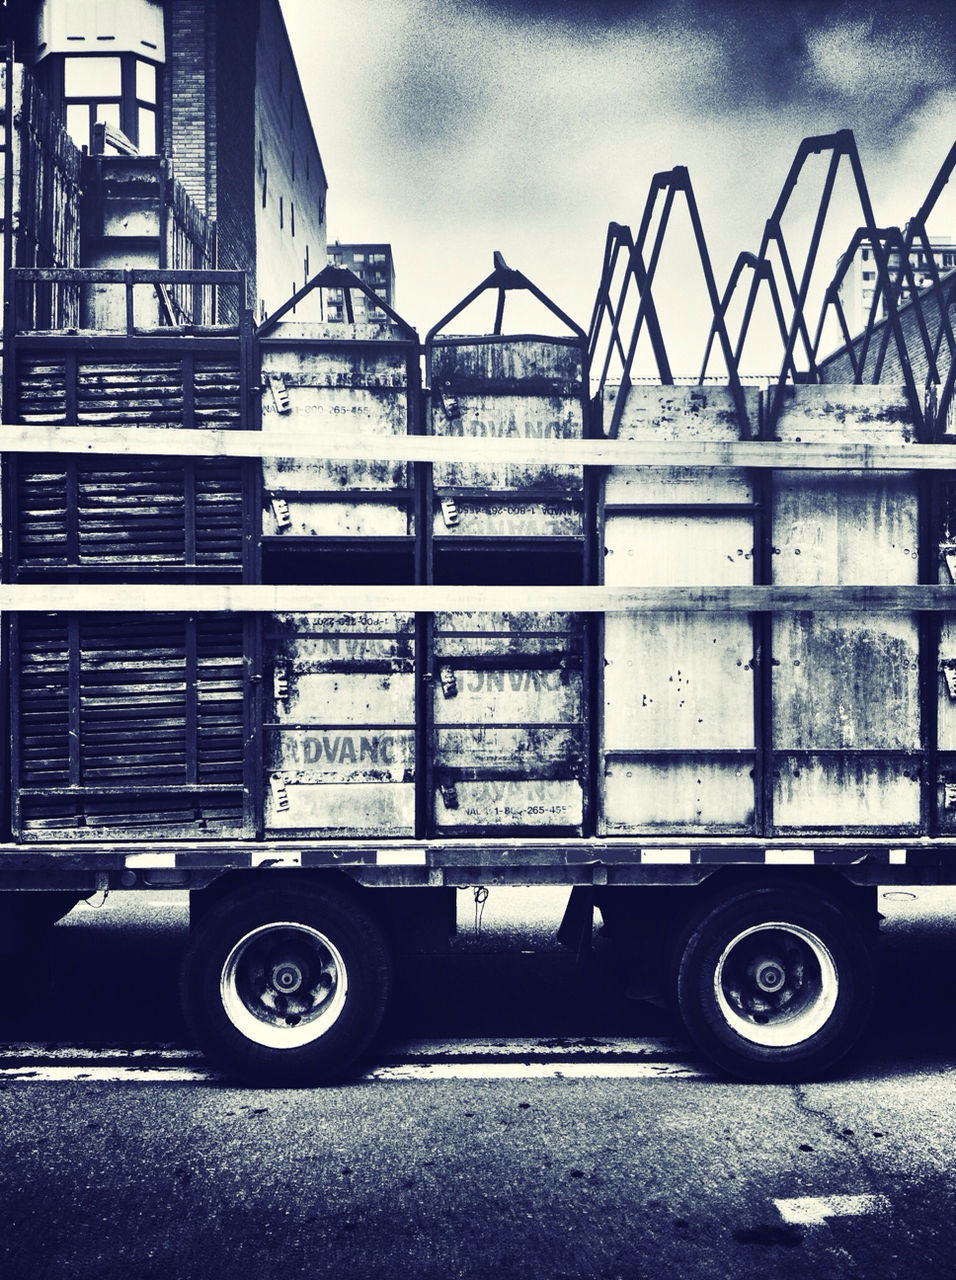 Close-up of containers on truck